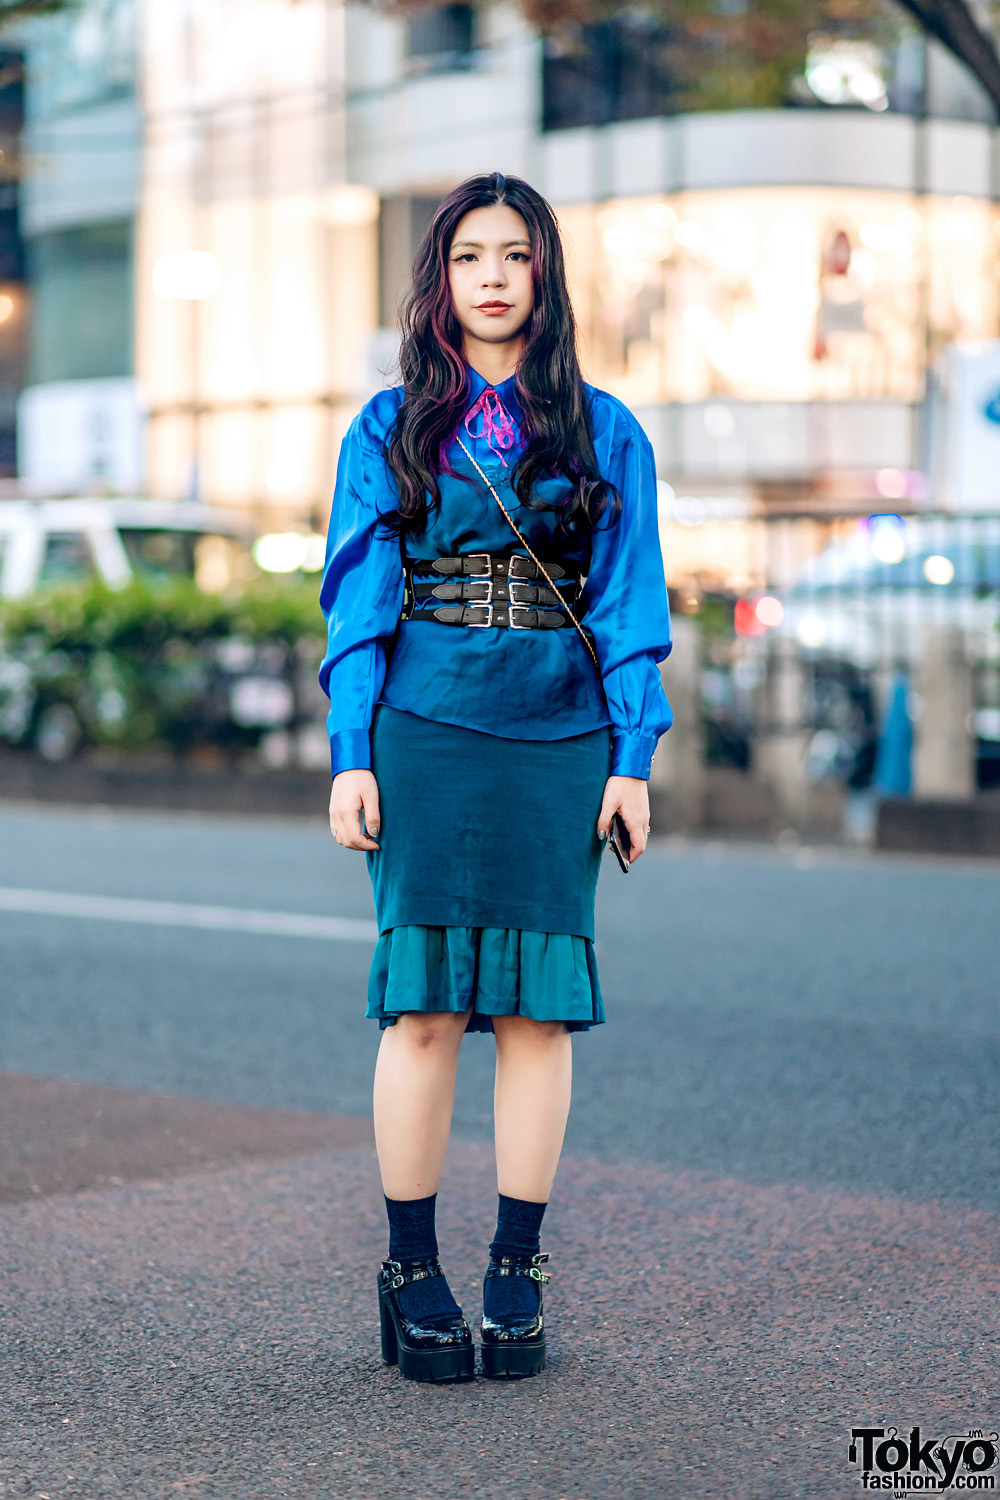 Chic Resale Streetwear in Harajuku w/ Camisole Over Satin Shirt, Corset Belt, Layered Skirts, Patent Heels & Gold Floral Sling